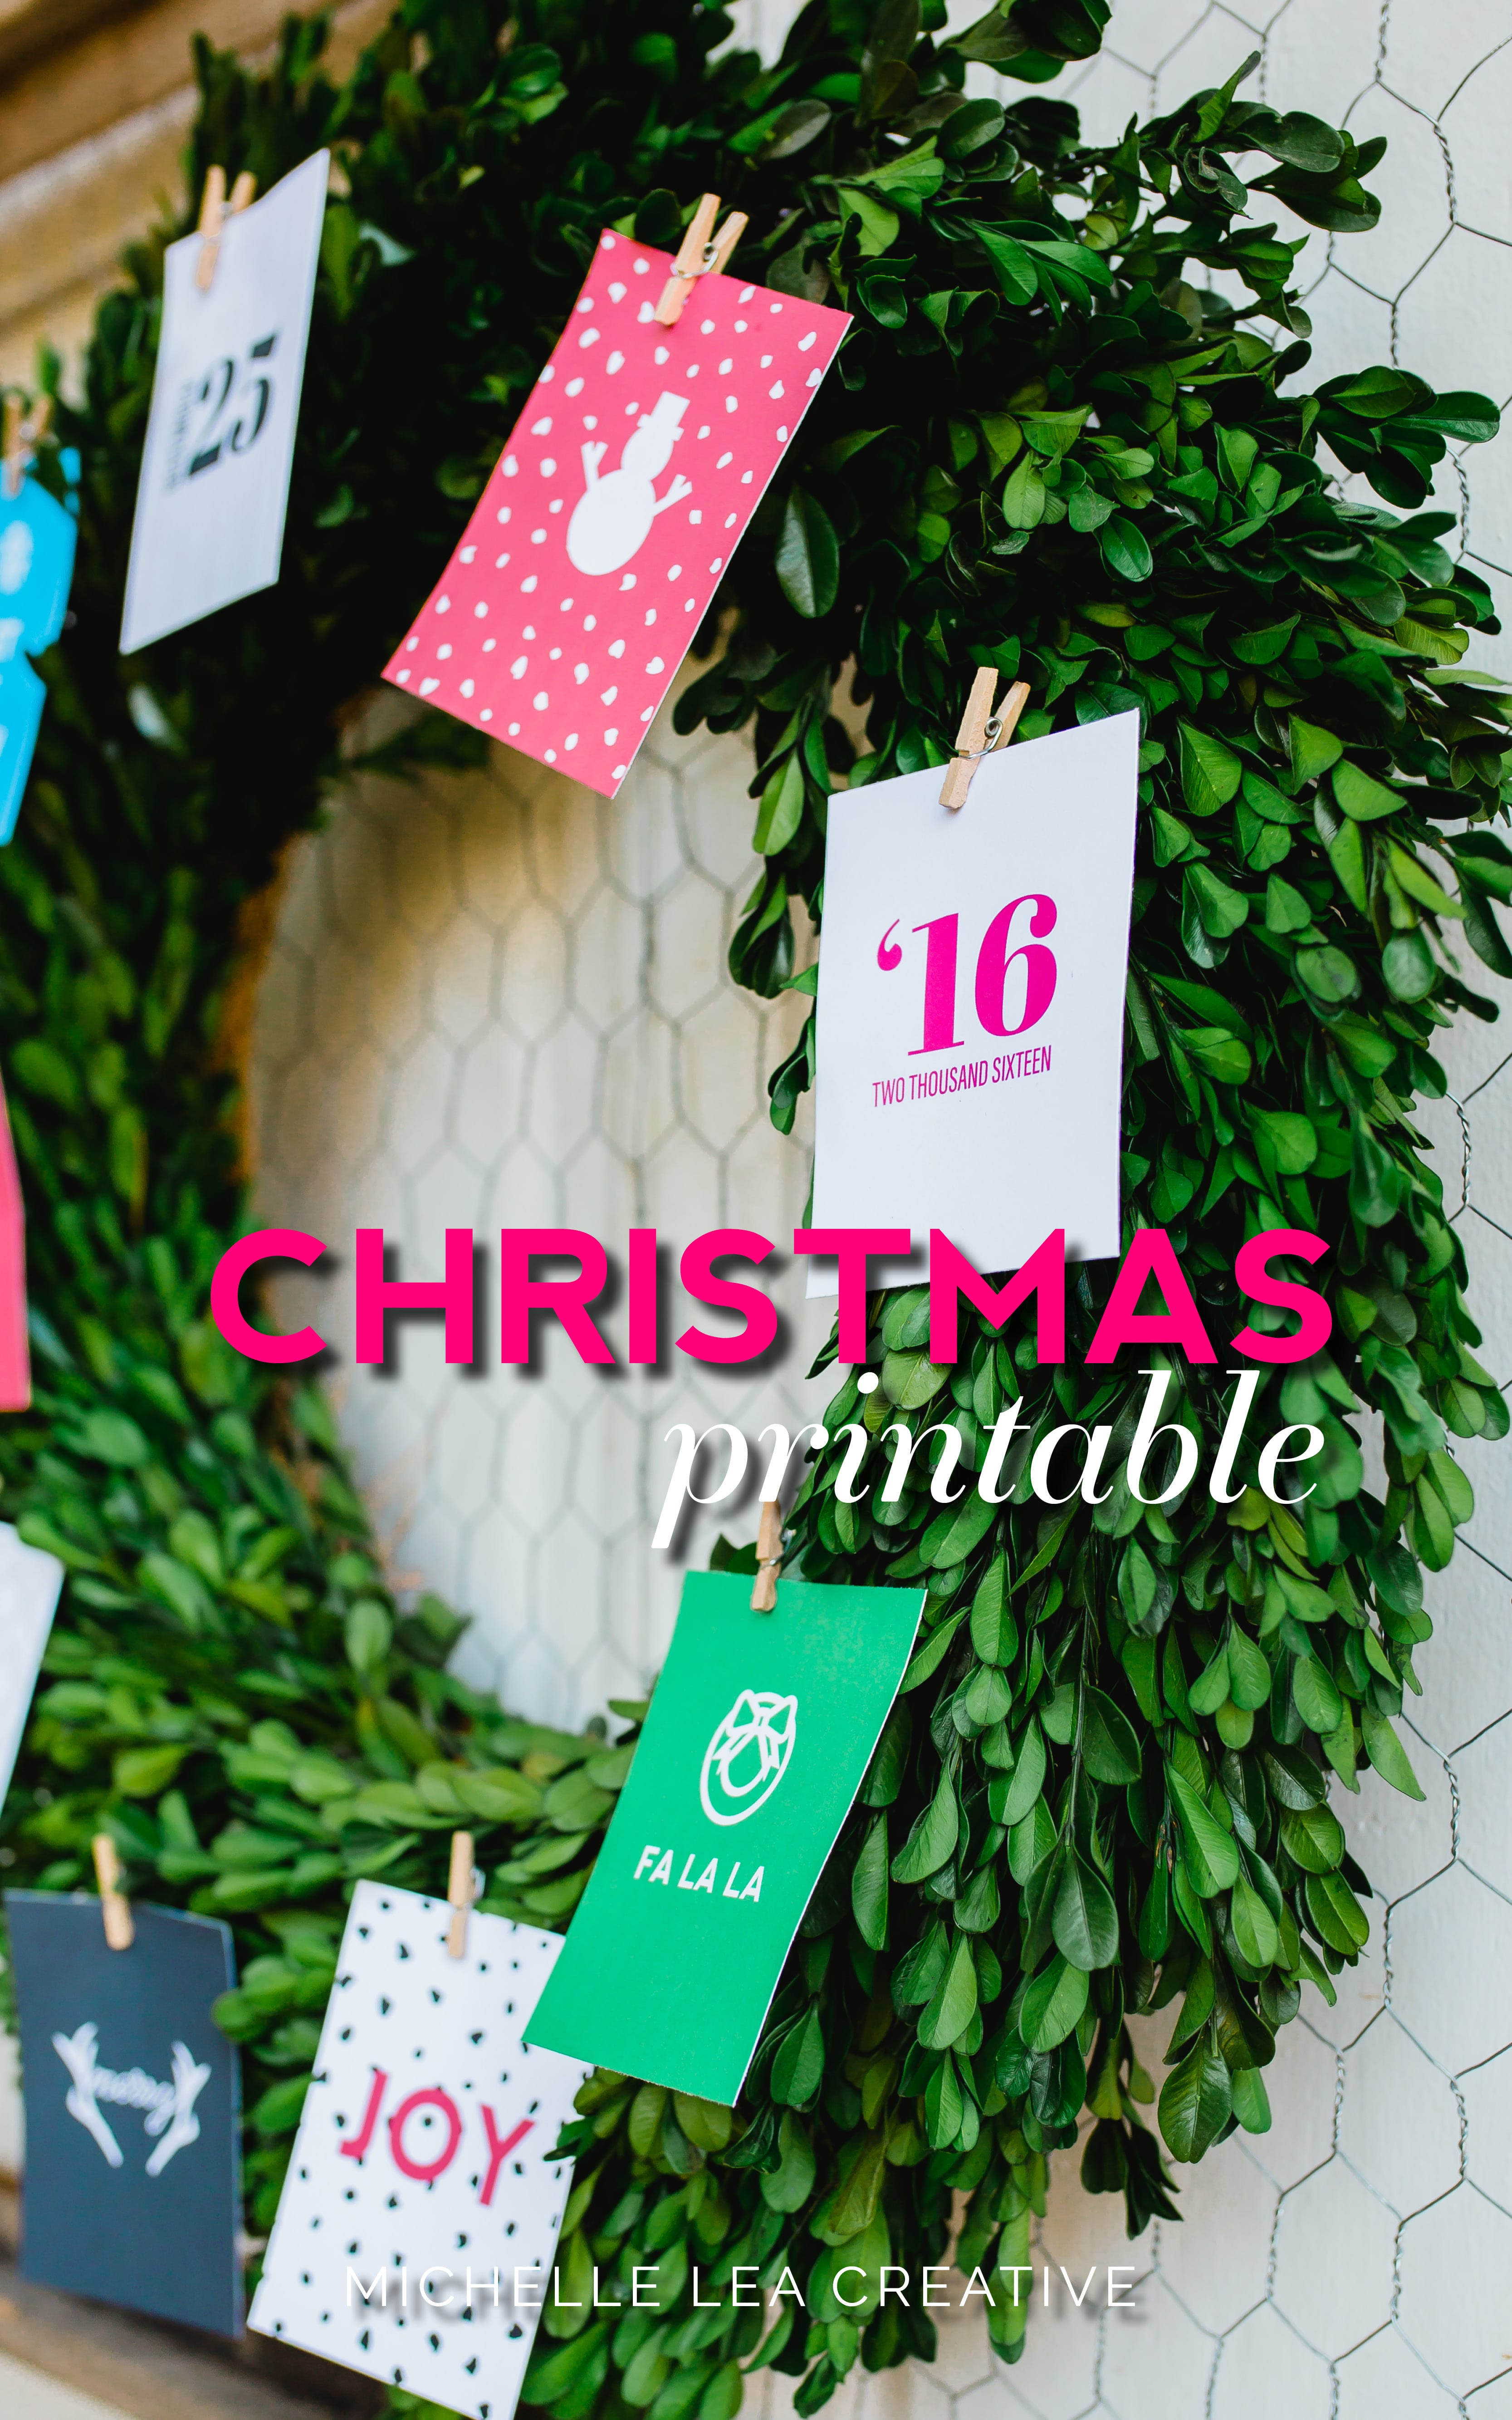 Christmas Tree Printables - A fun way to decorate in small spaces